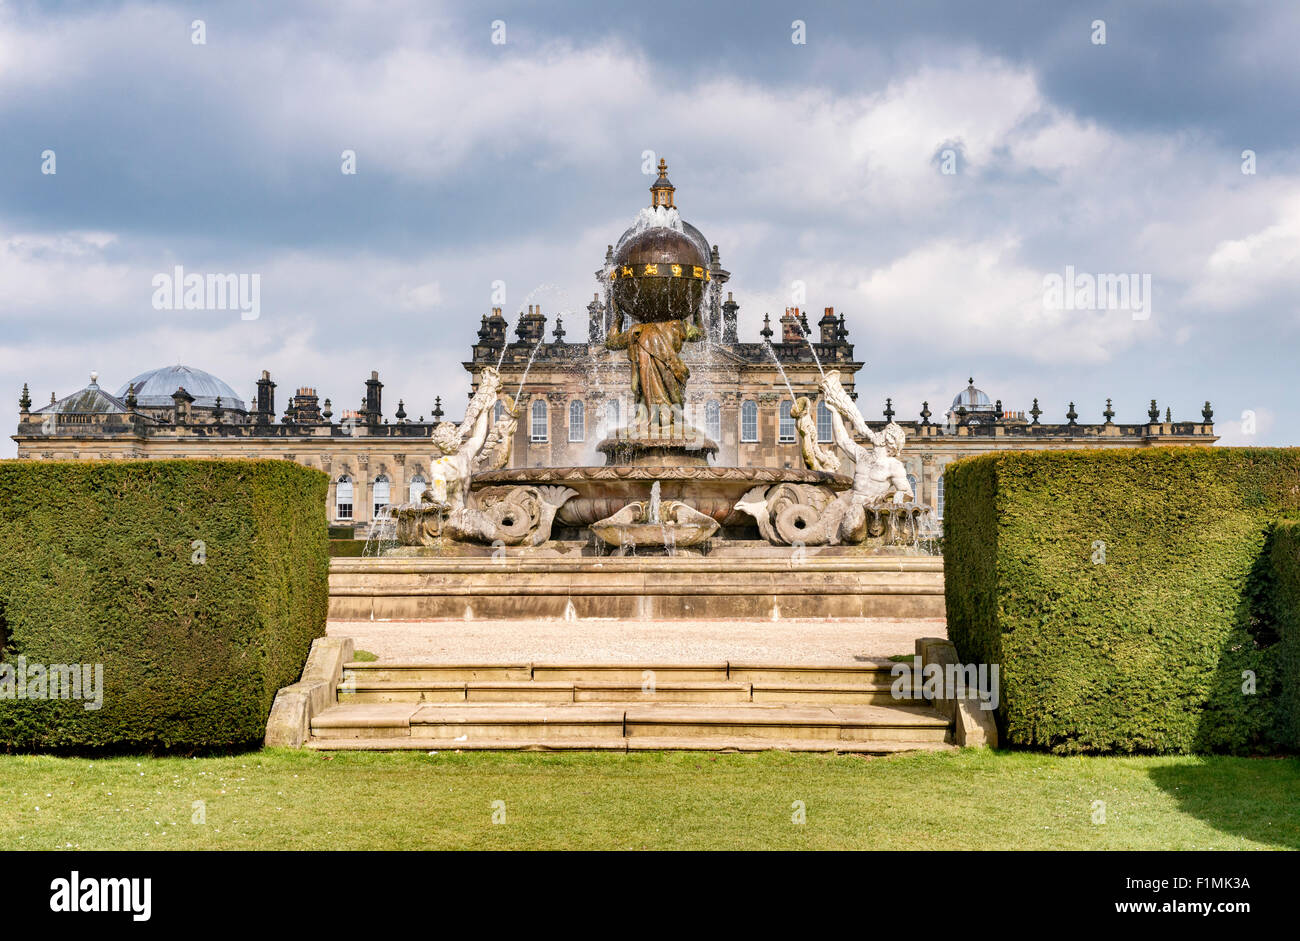 The Atlas fountain at Castle Howard, North Yorkshire Stock Photo